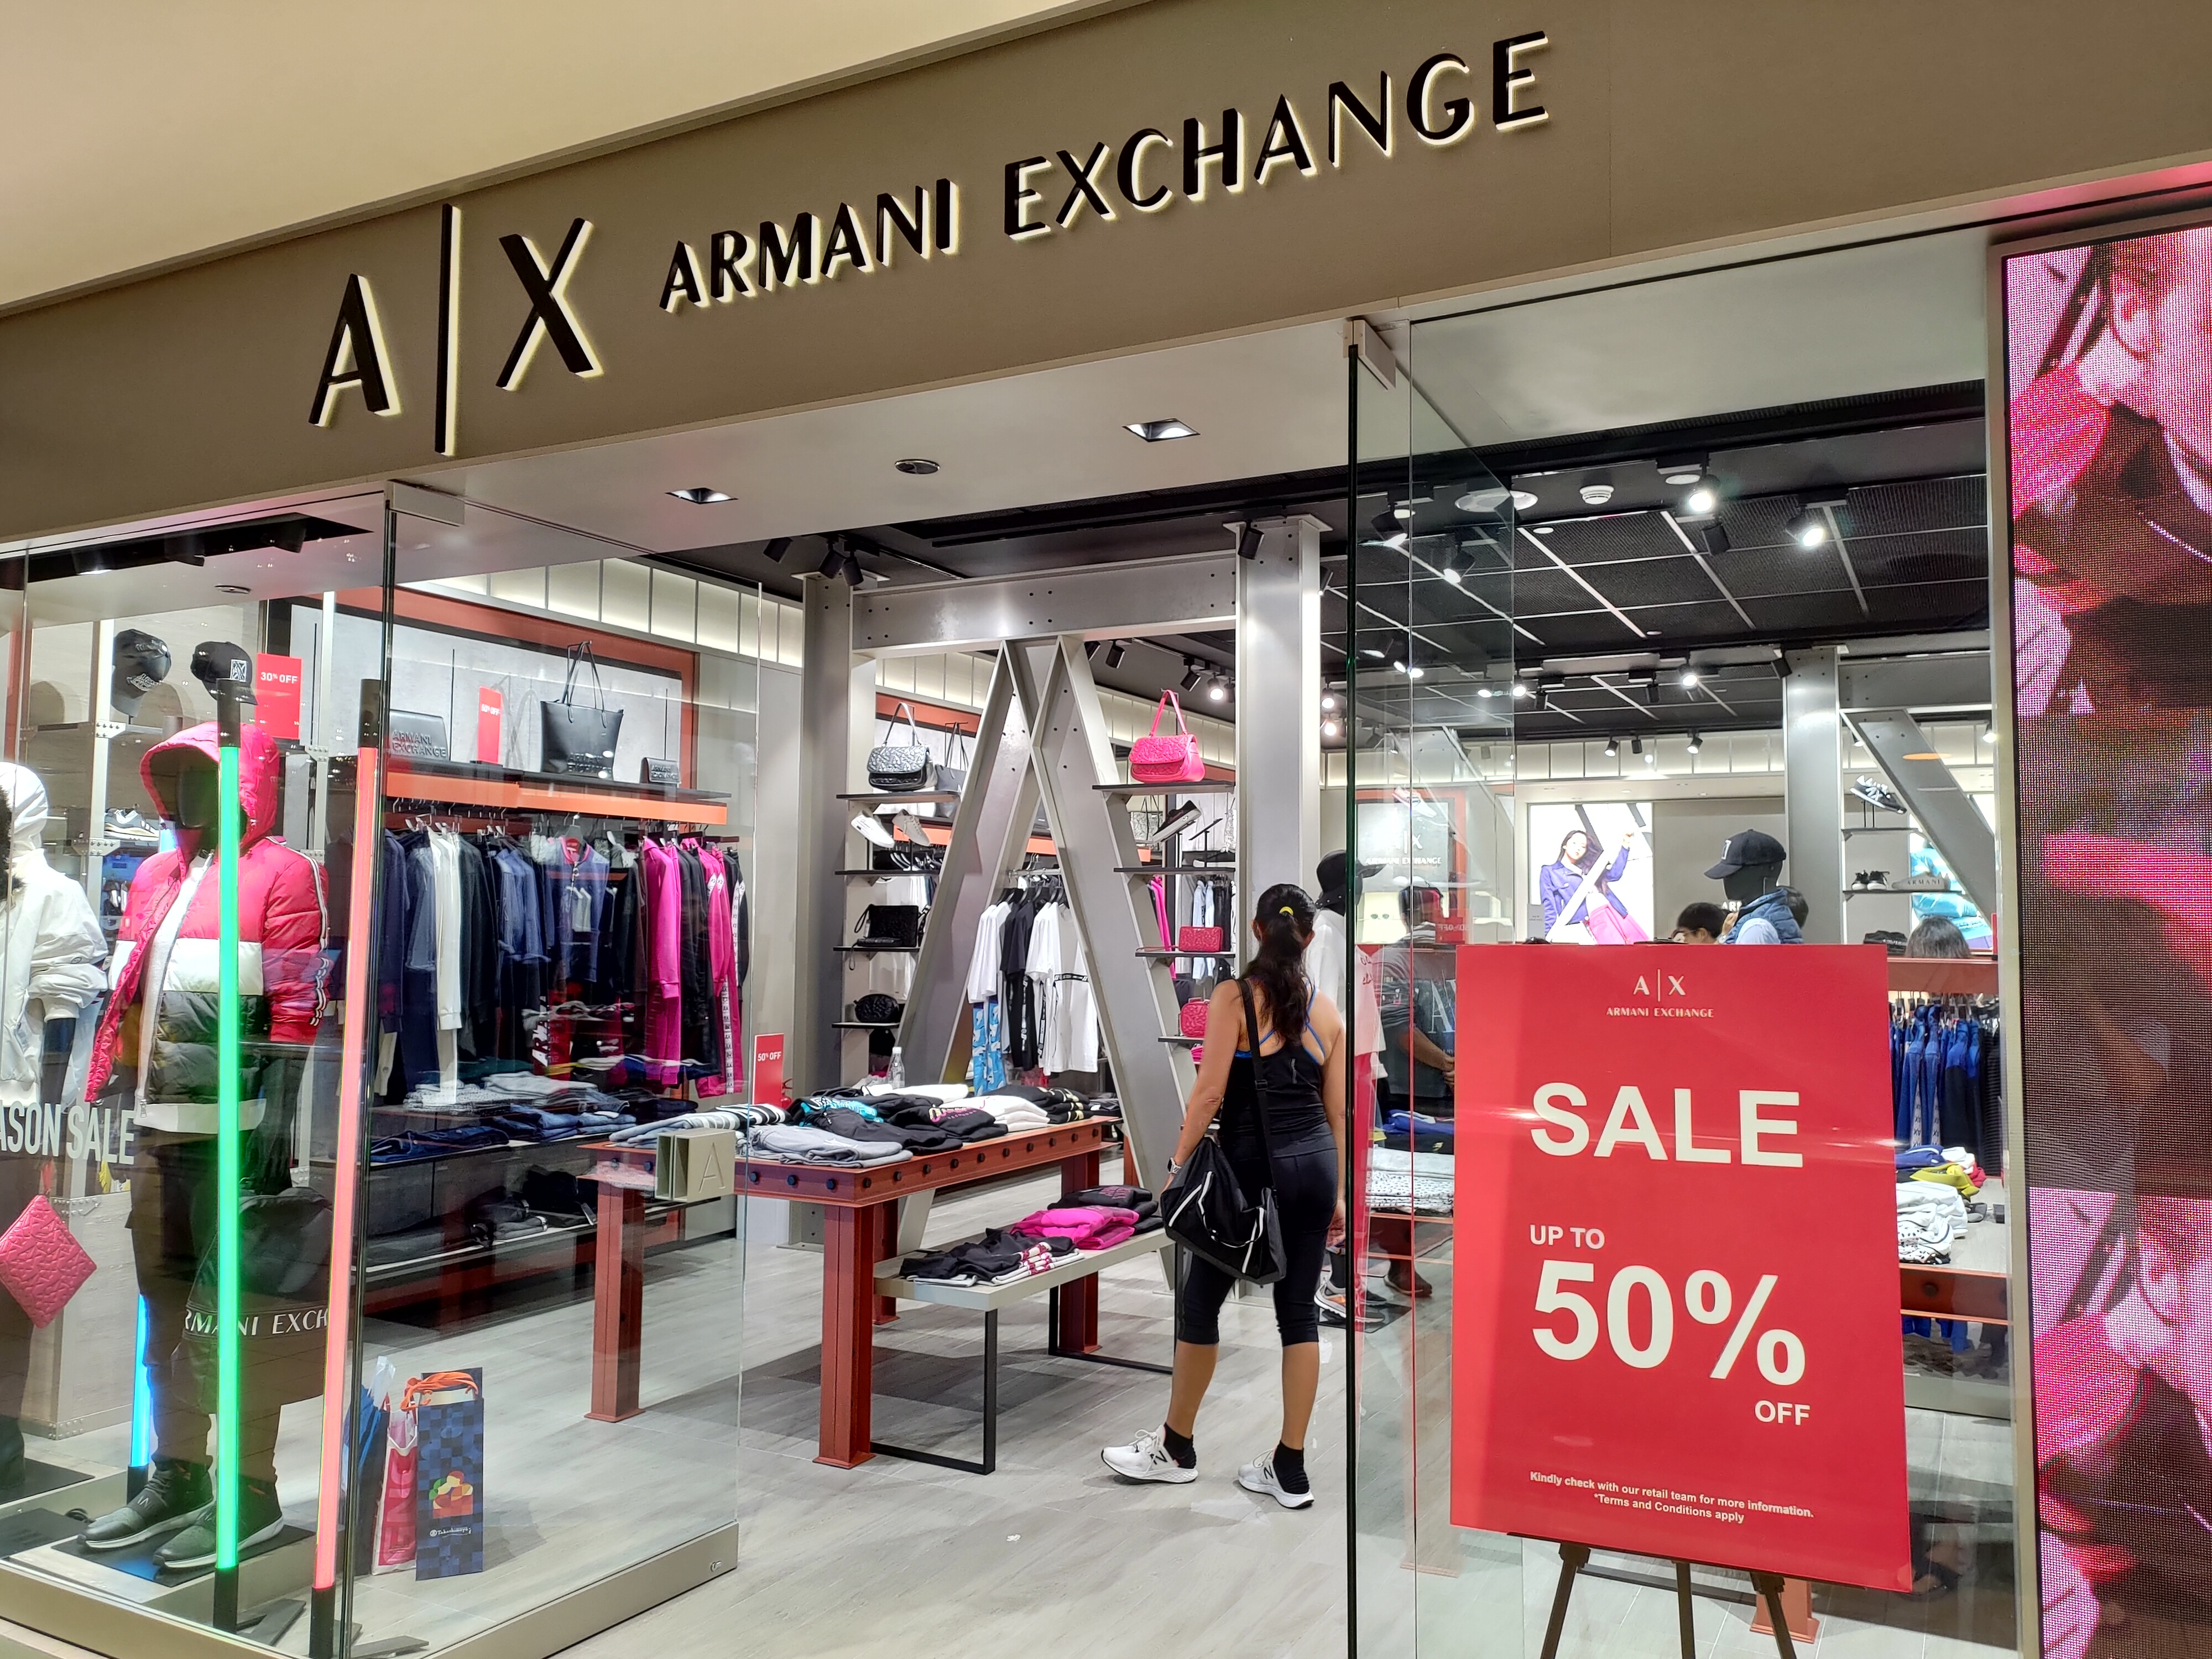 A|X Armani Exchange Is Having A Sale With Up To 50% Discount For A Limited Time - 1